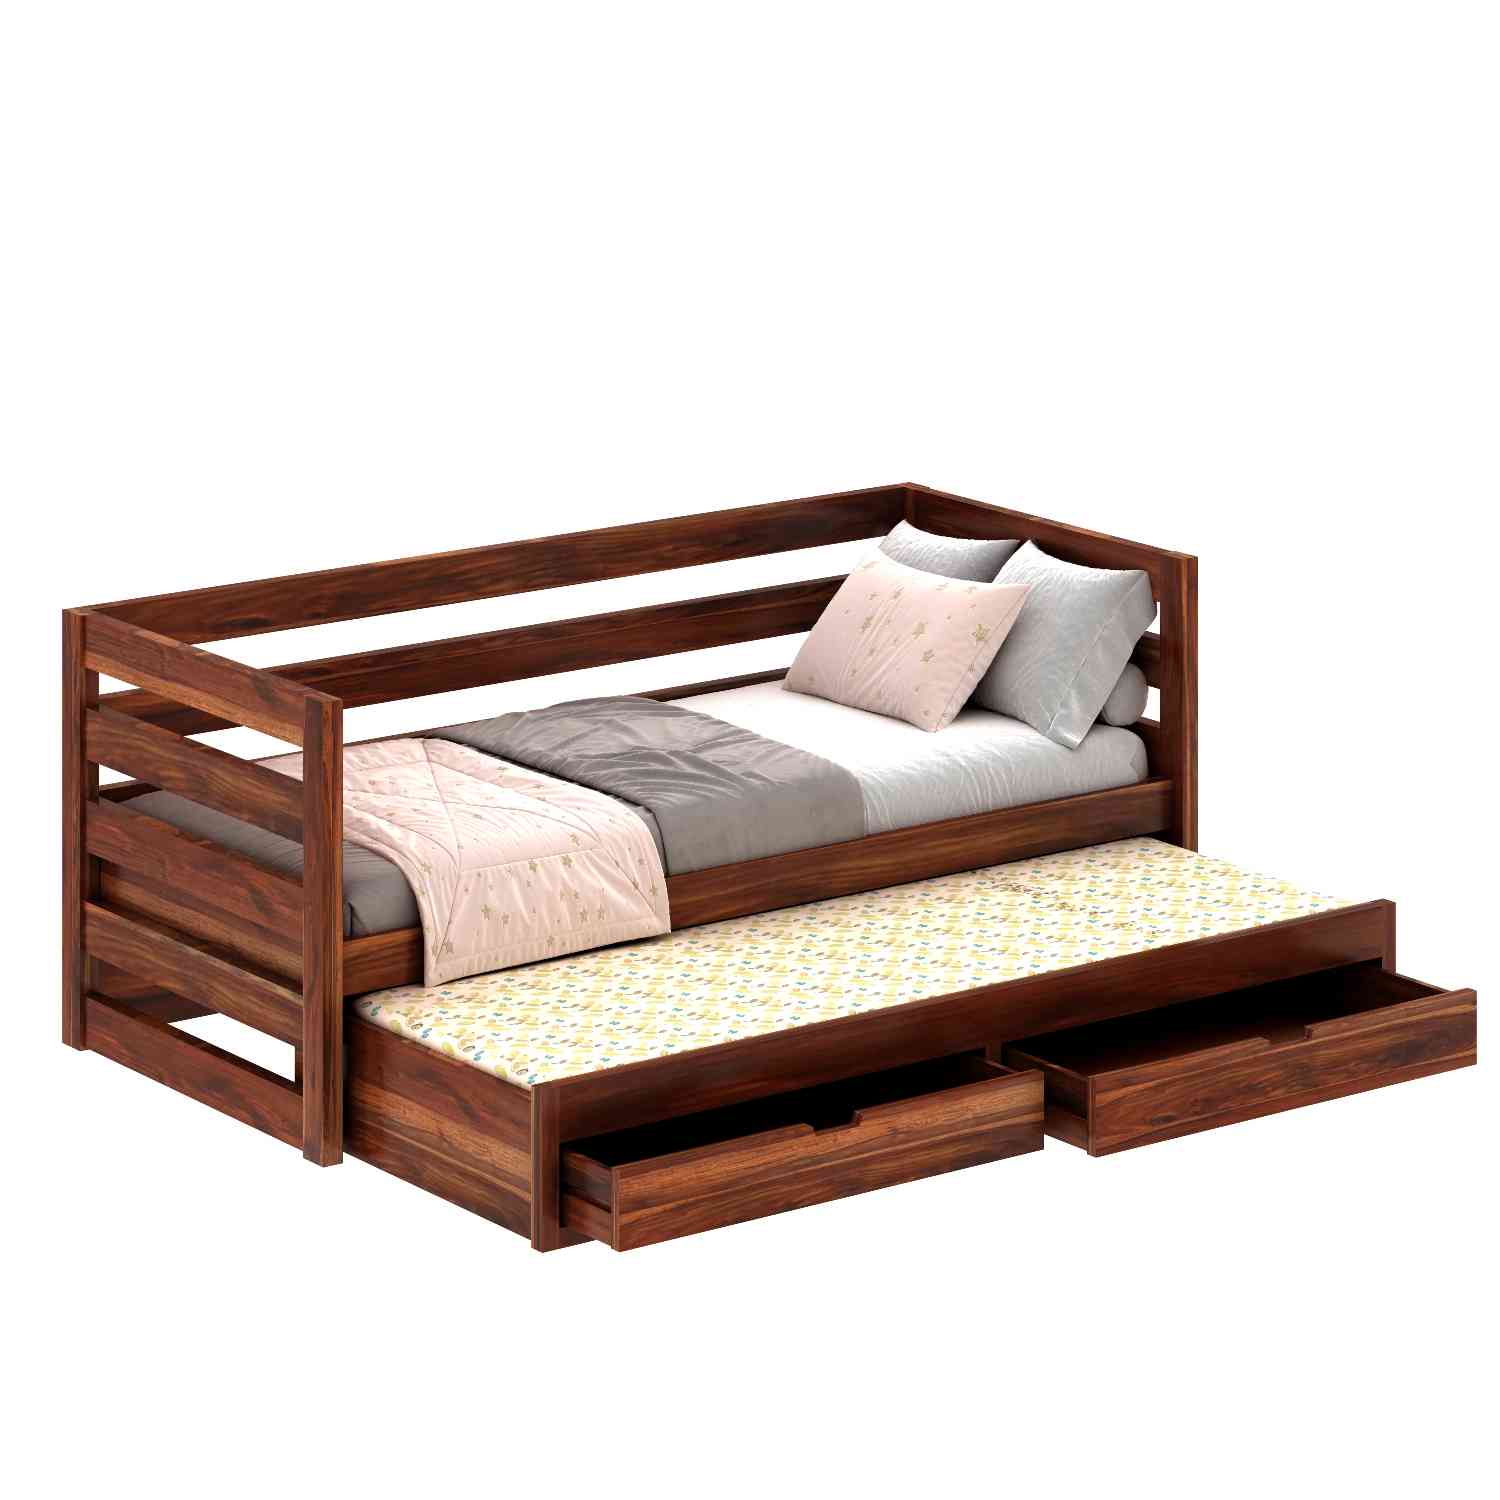 Feelinn Solid Sheesham Wood Trundle Bed For Kids (With Mattress, Natural Finish)